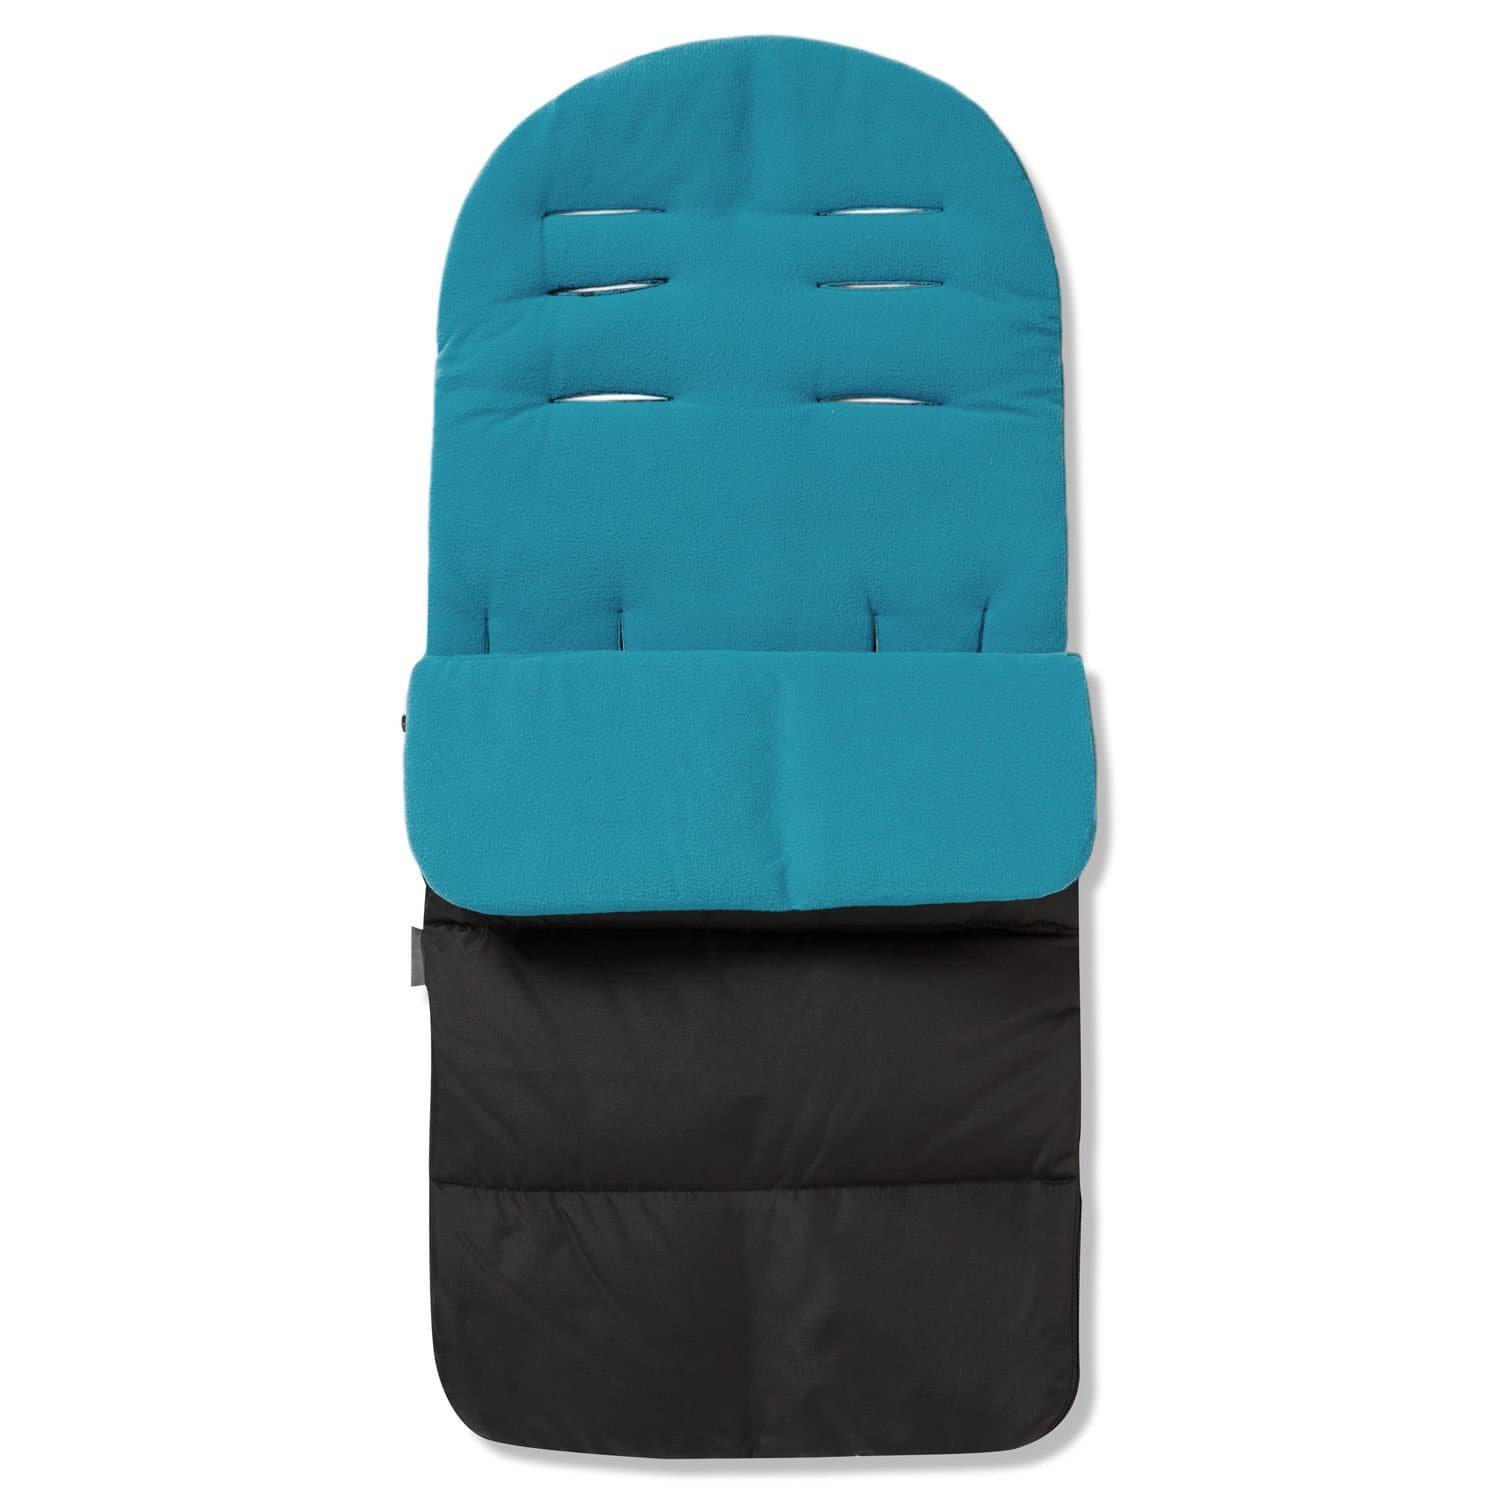 Premium Footmuff / Cosy Toes Compatible with Recaro - Ocean Blue / Fits All Models | For Your Little One